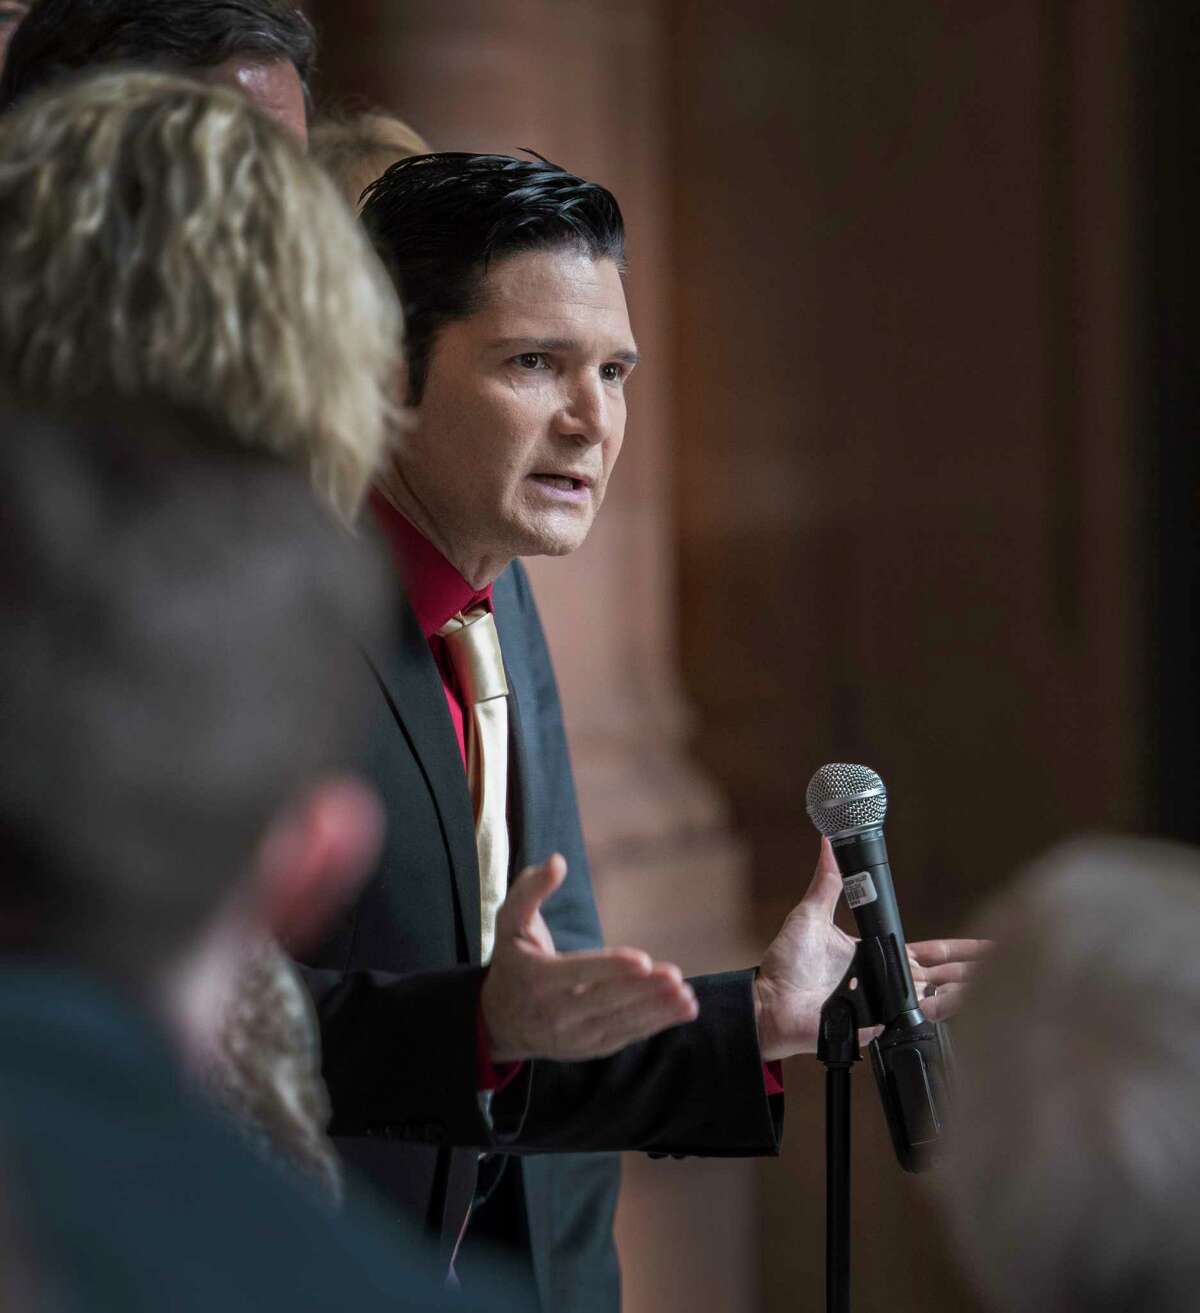 Actor Corey Feldman joins demonstrators representing the New Yorkers Against Hidden Predators to speak out about child abuse at the State Capitol Wednesday March 14, 2018 Albany, N.Y. (Skip Dickstein/Times Union)